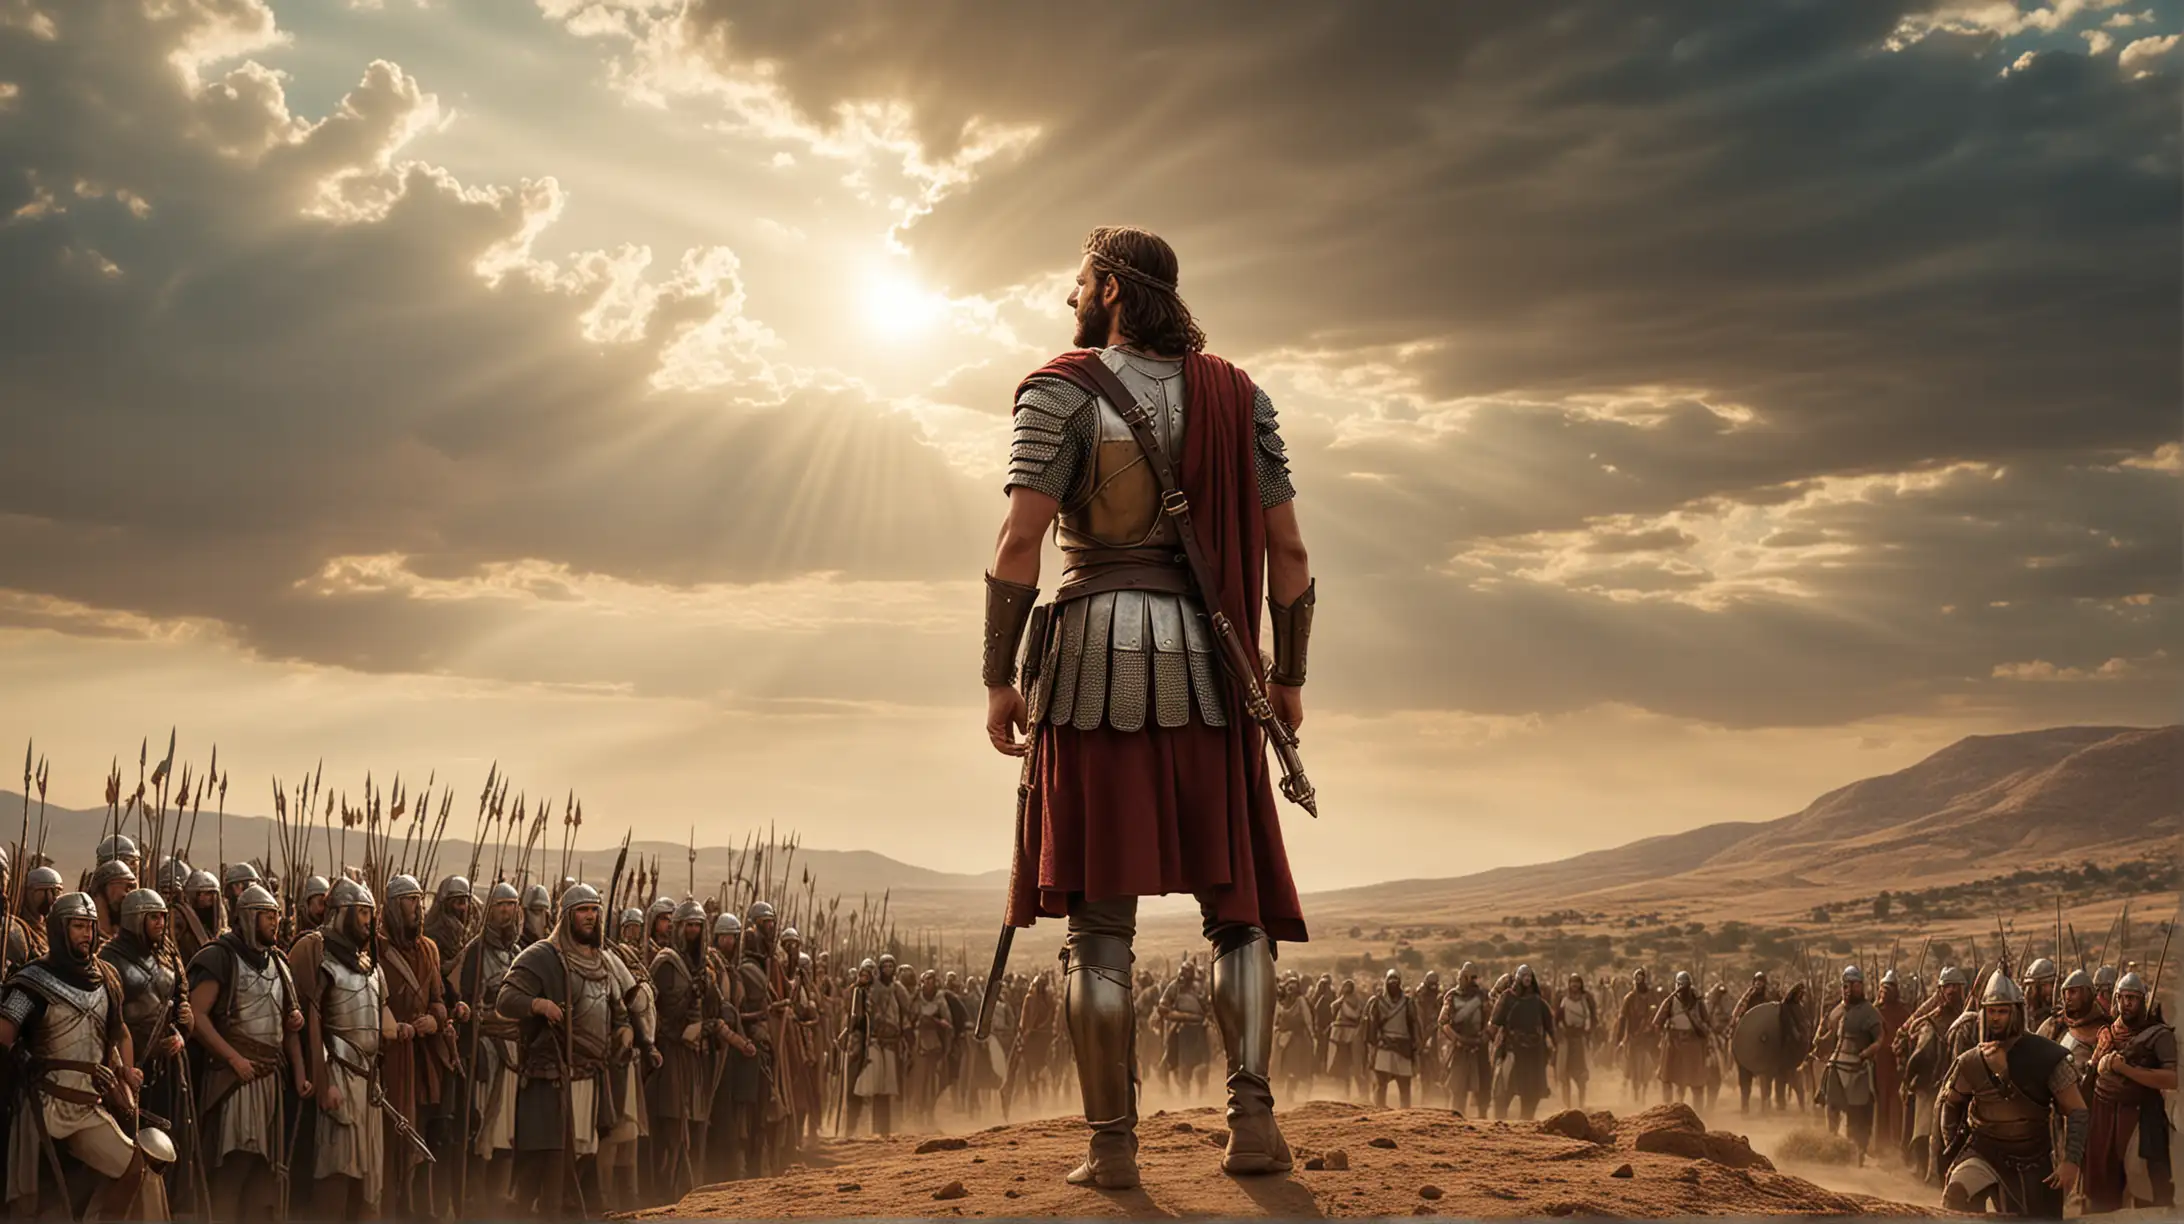 A battle ready King David facing a crowd of warriors on desert hilly fields. In the background a magnificent sky. Set during the Biblical Era of King David.